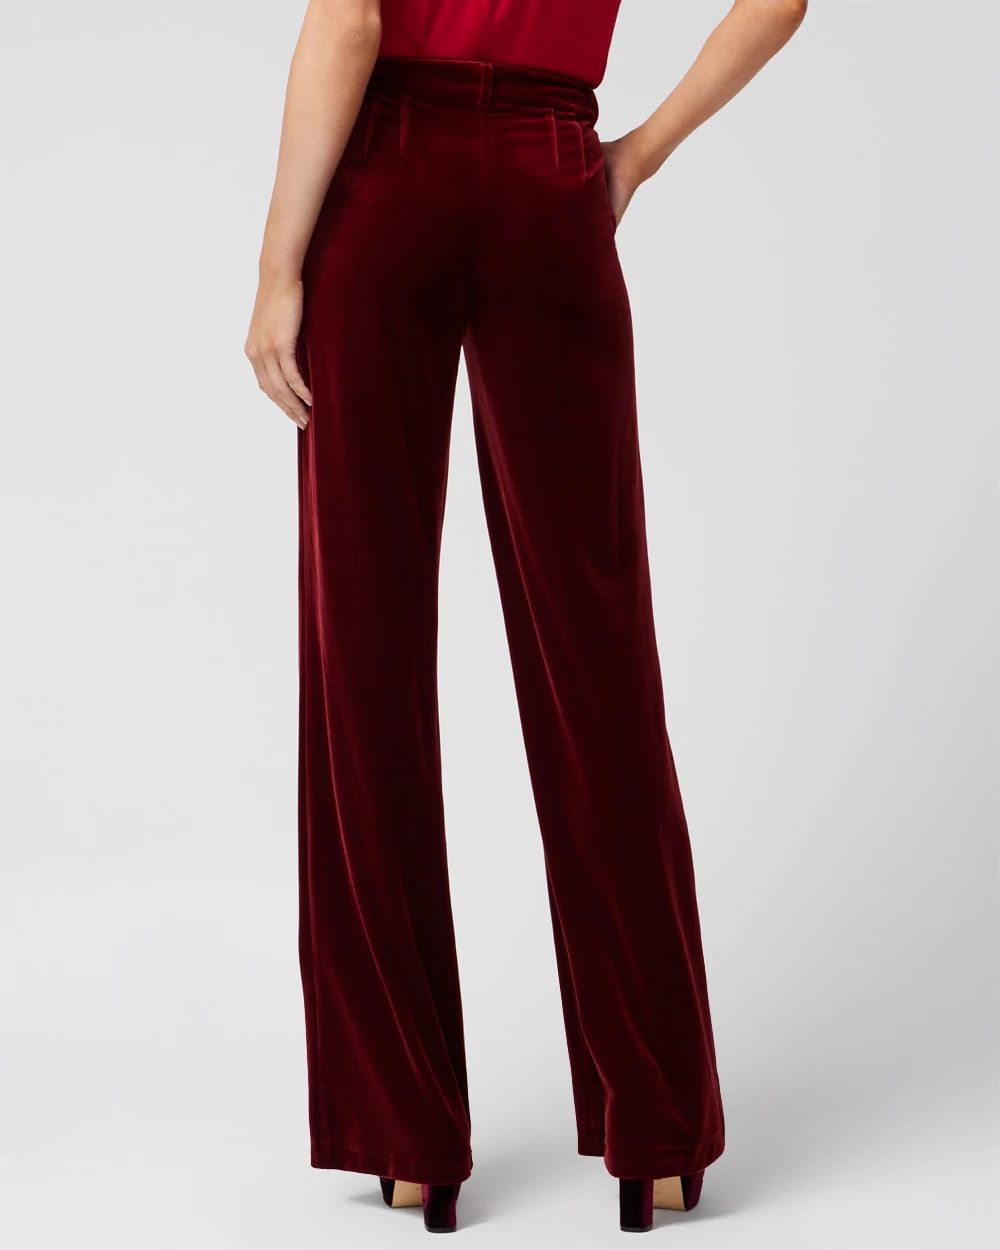 WHBM® Petite Luna Wide Leg Velvet Trousers click to view larger image.